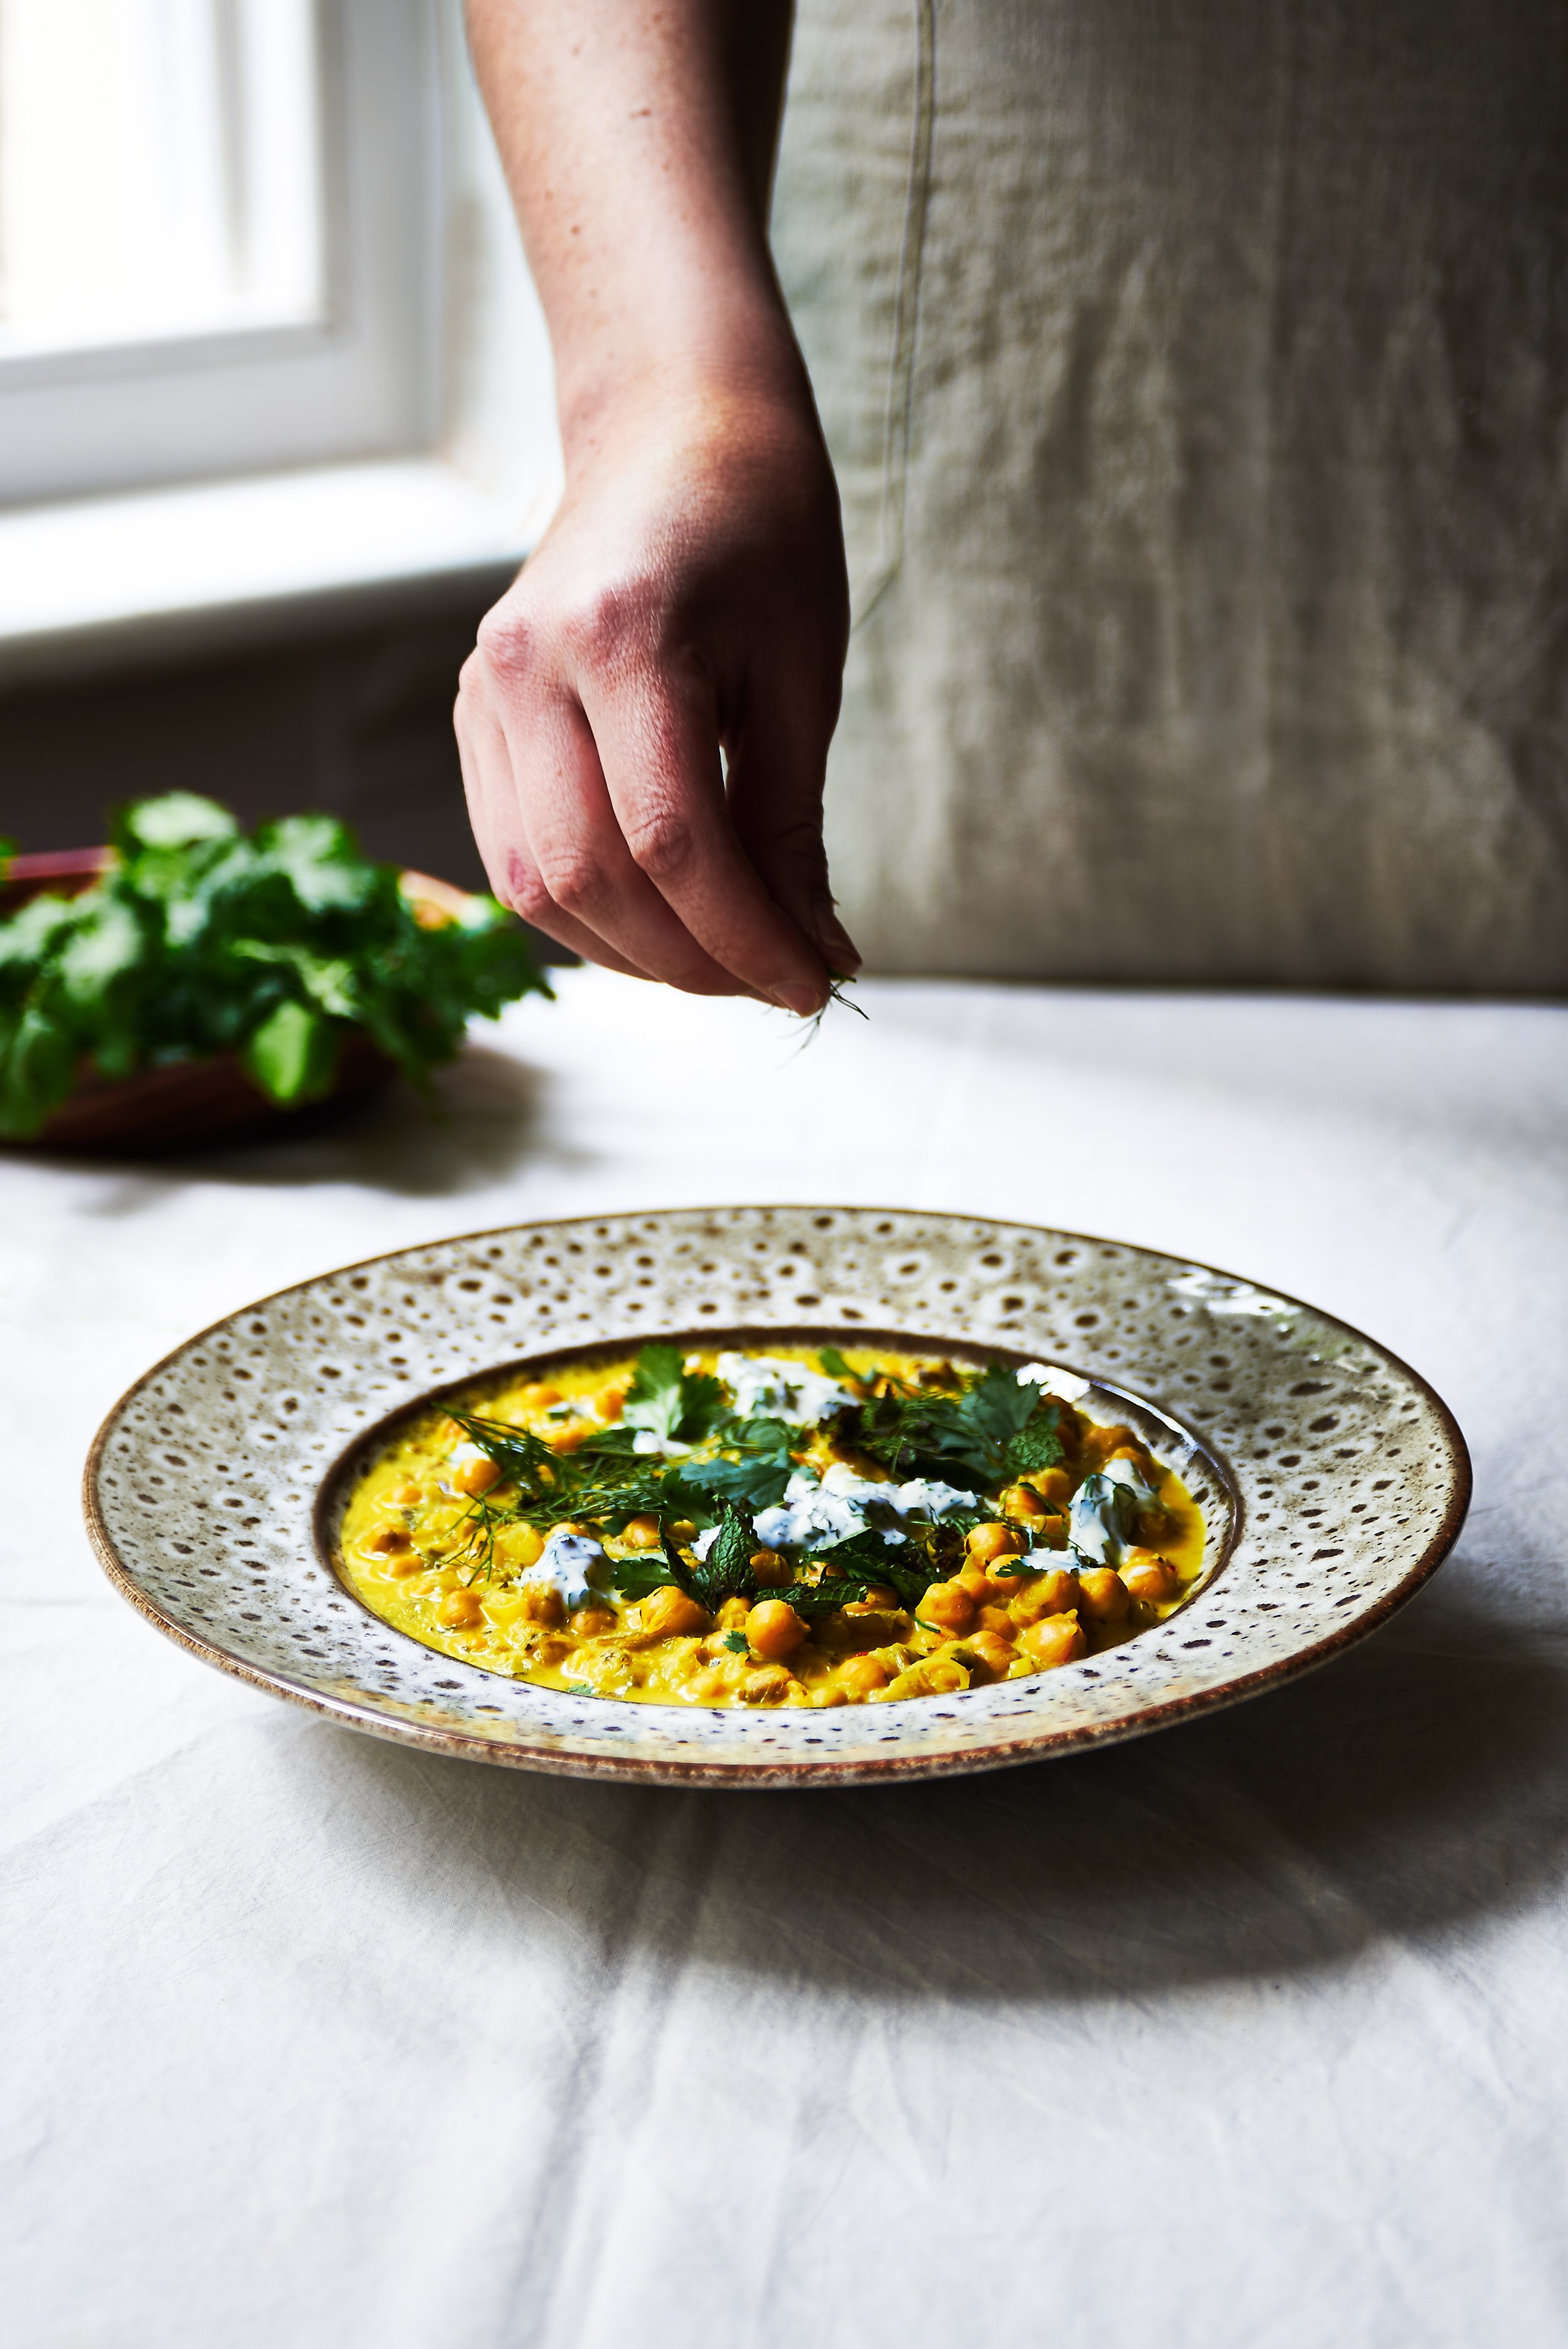 Courgette and chickpea stew in a bowl on white tableclothed table